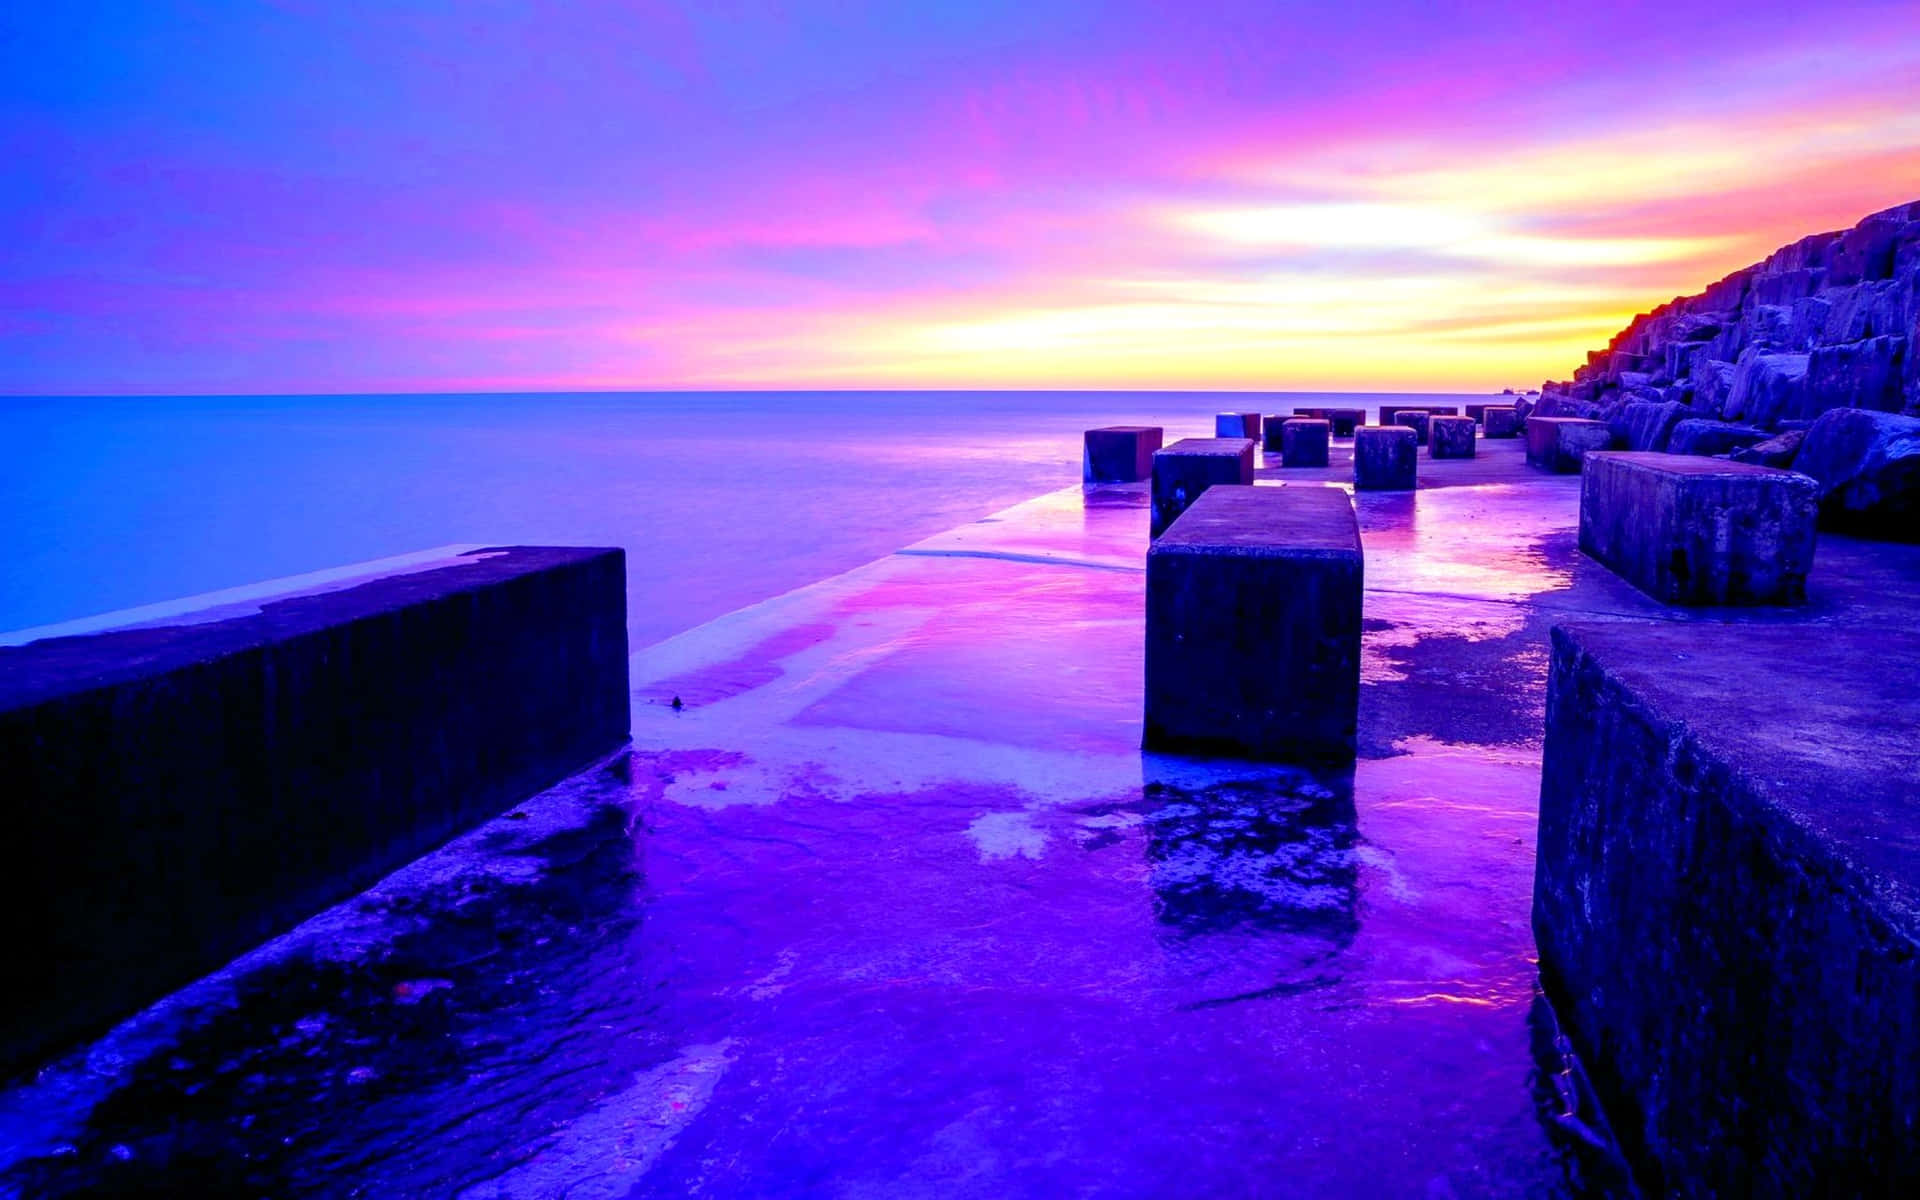 Enjoy the beauty of nature as the sun dips over the horizon casting a beautiful blue and purple sunset. Wallpaper